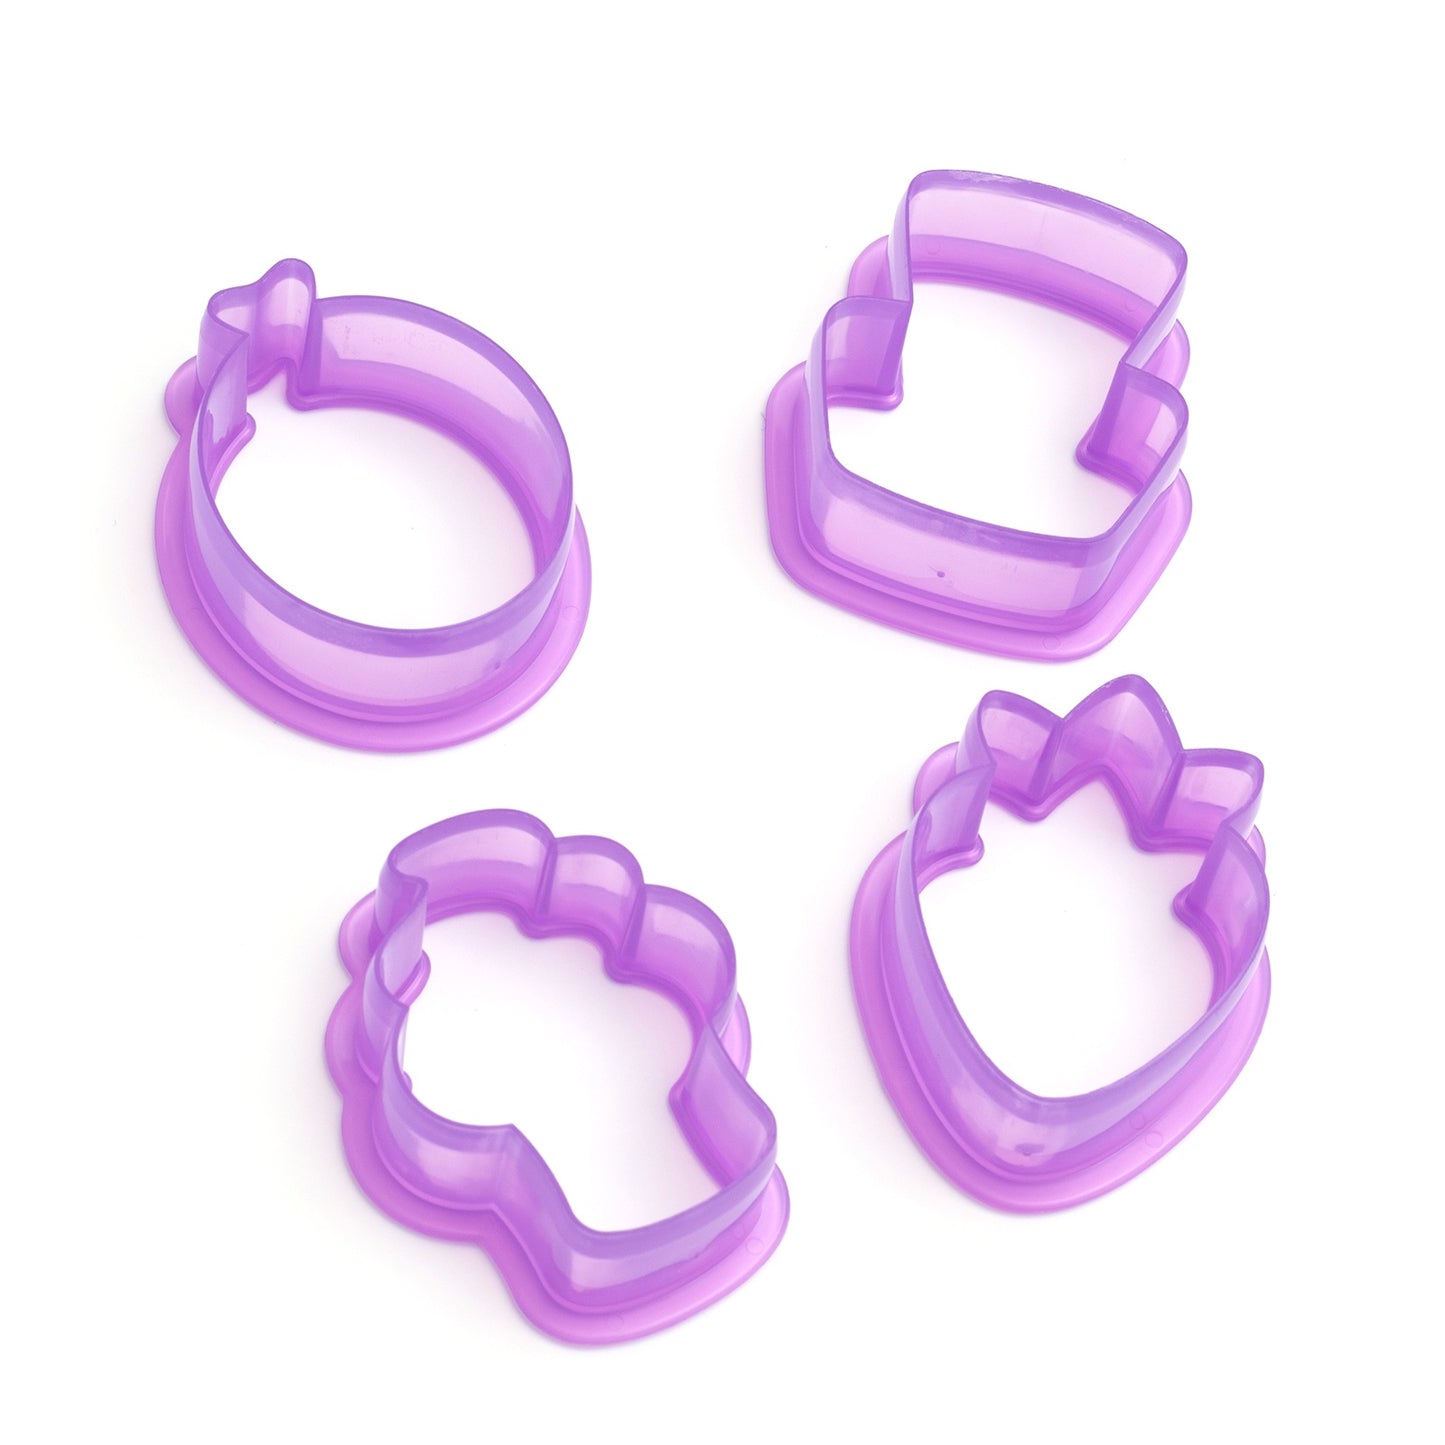 Sweet Sugarbelle Mini Cookie Cutters 4/Pkg-Party